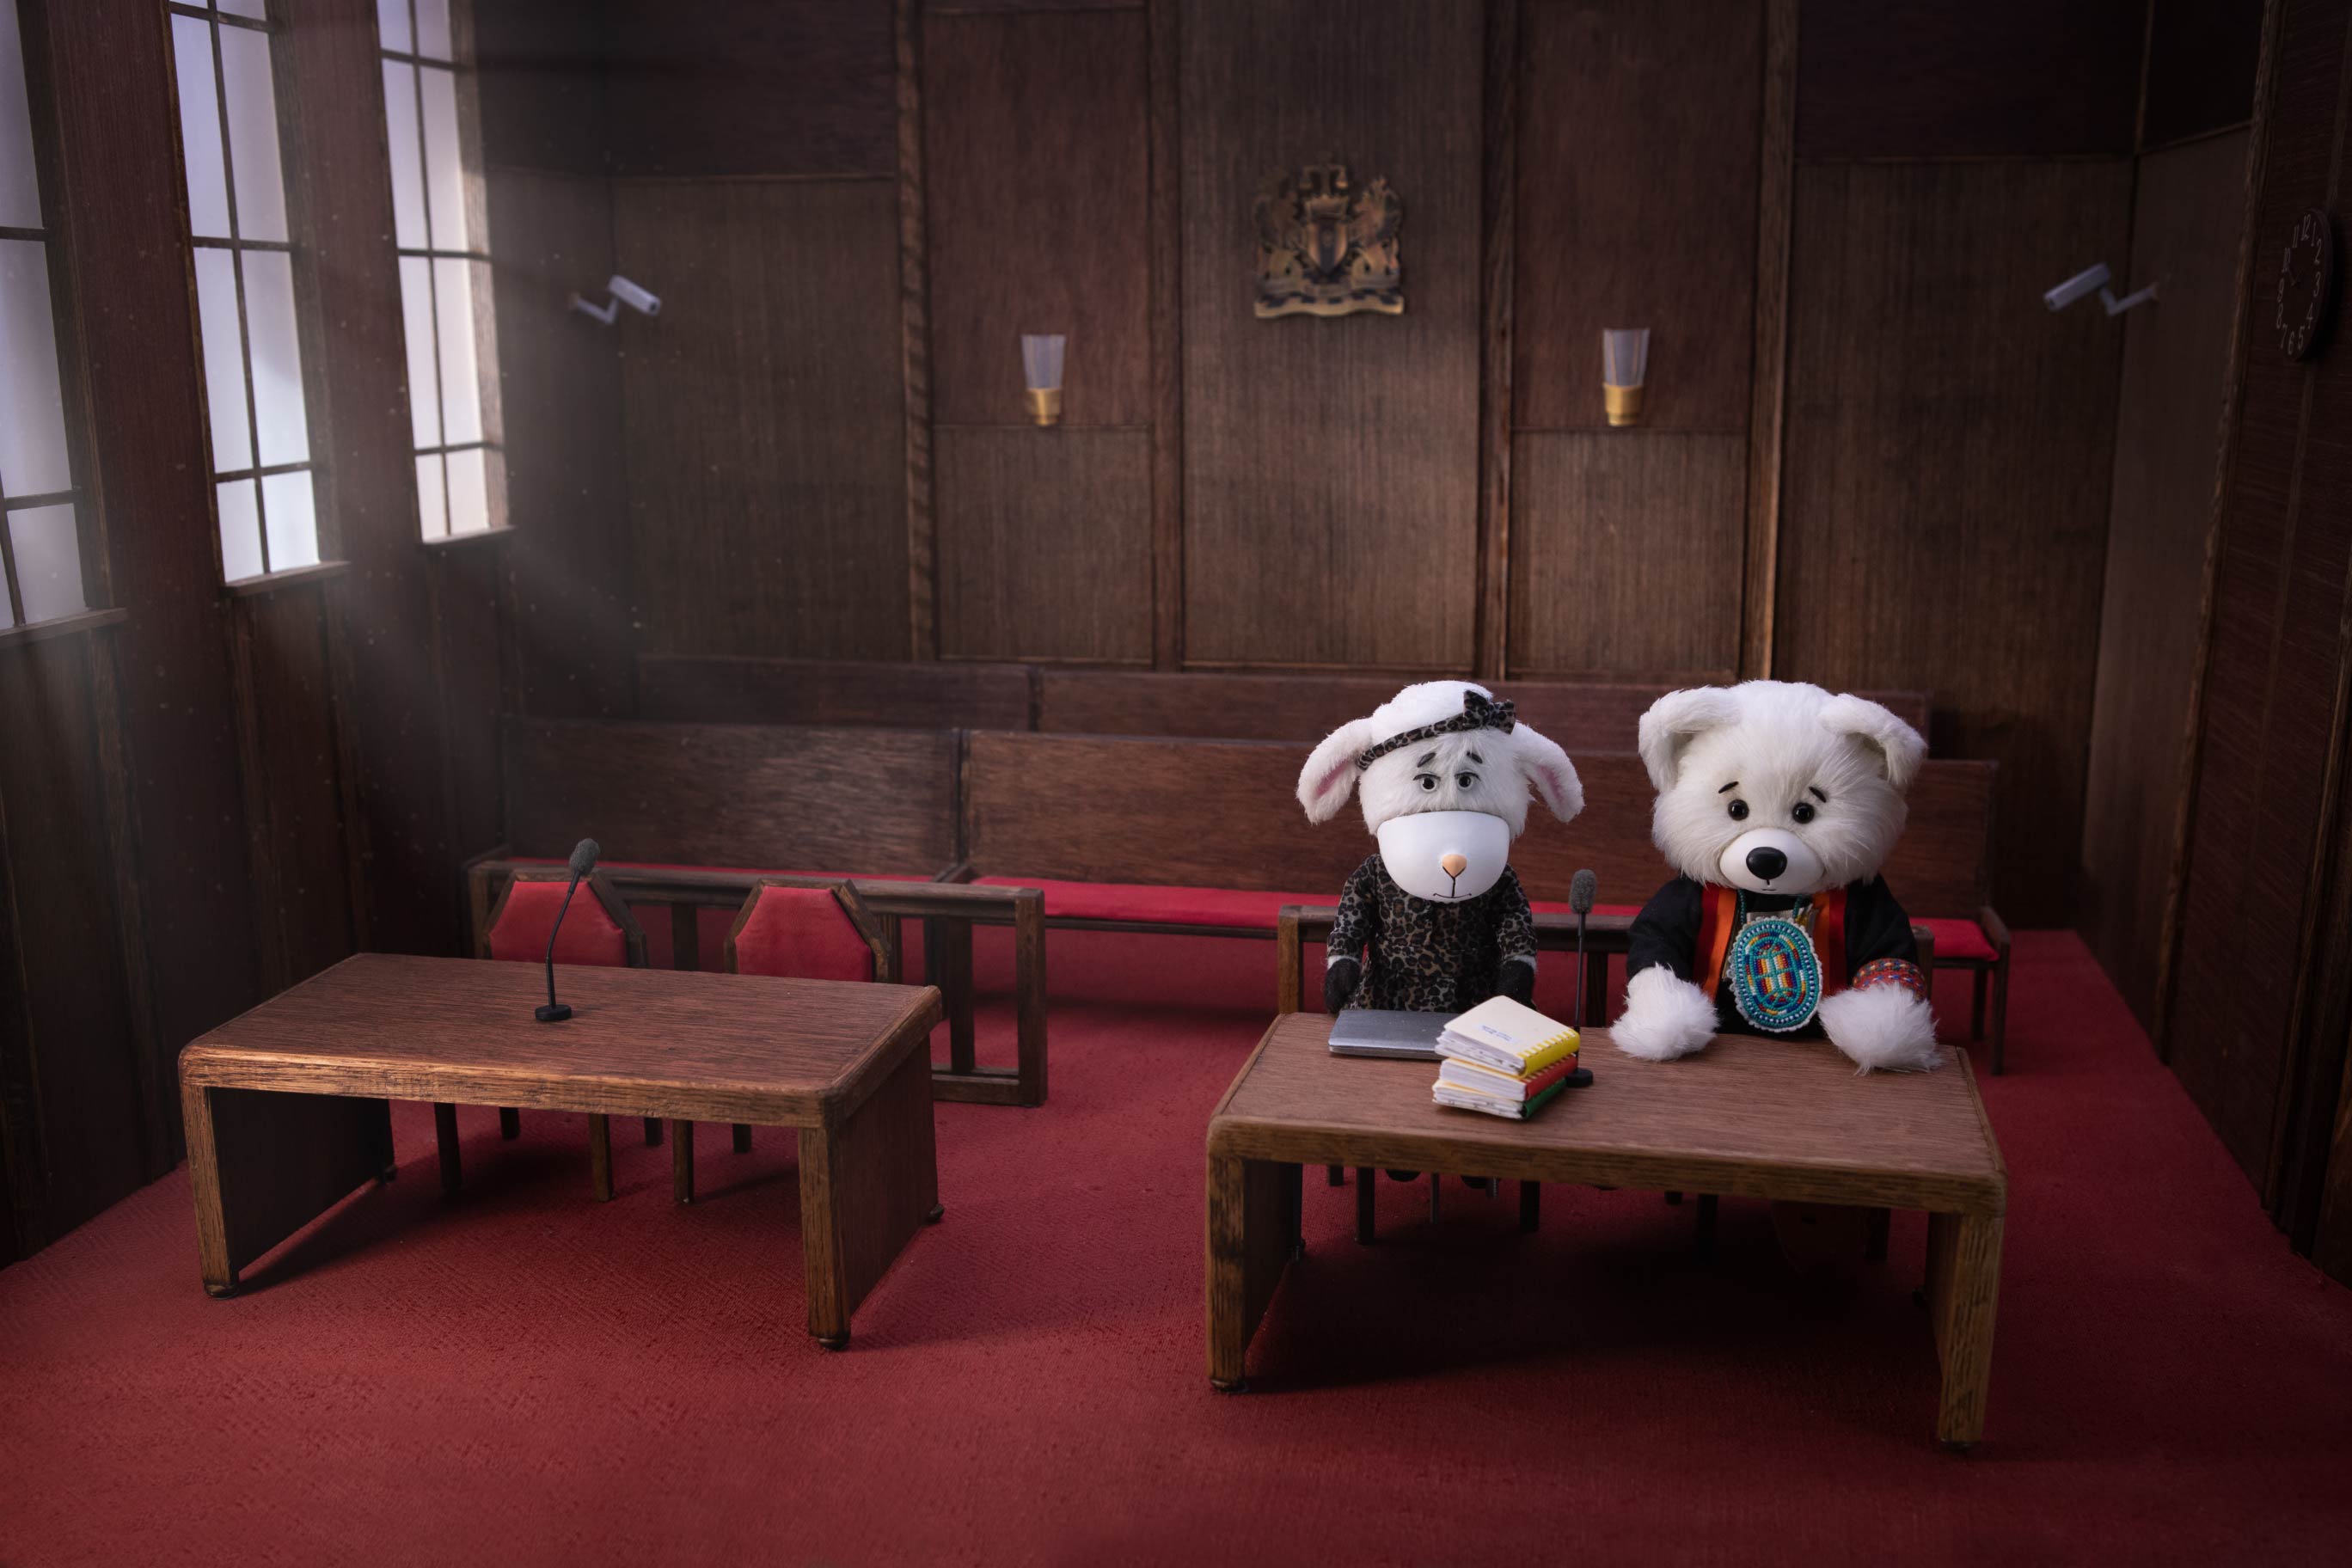 Movie still of Spirit Bear and Cindy the Sheep in the Tribunal